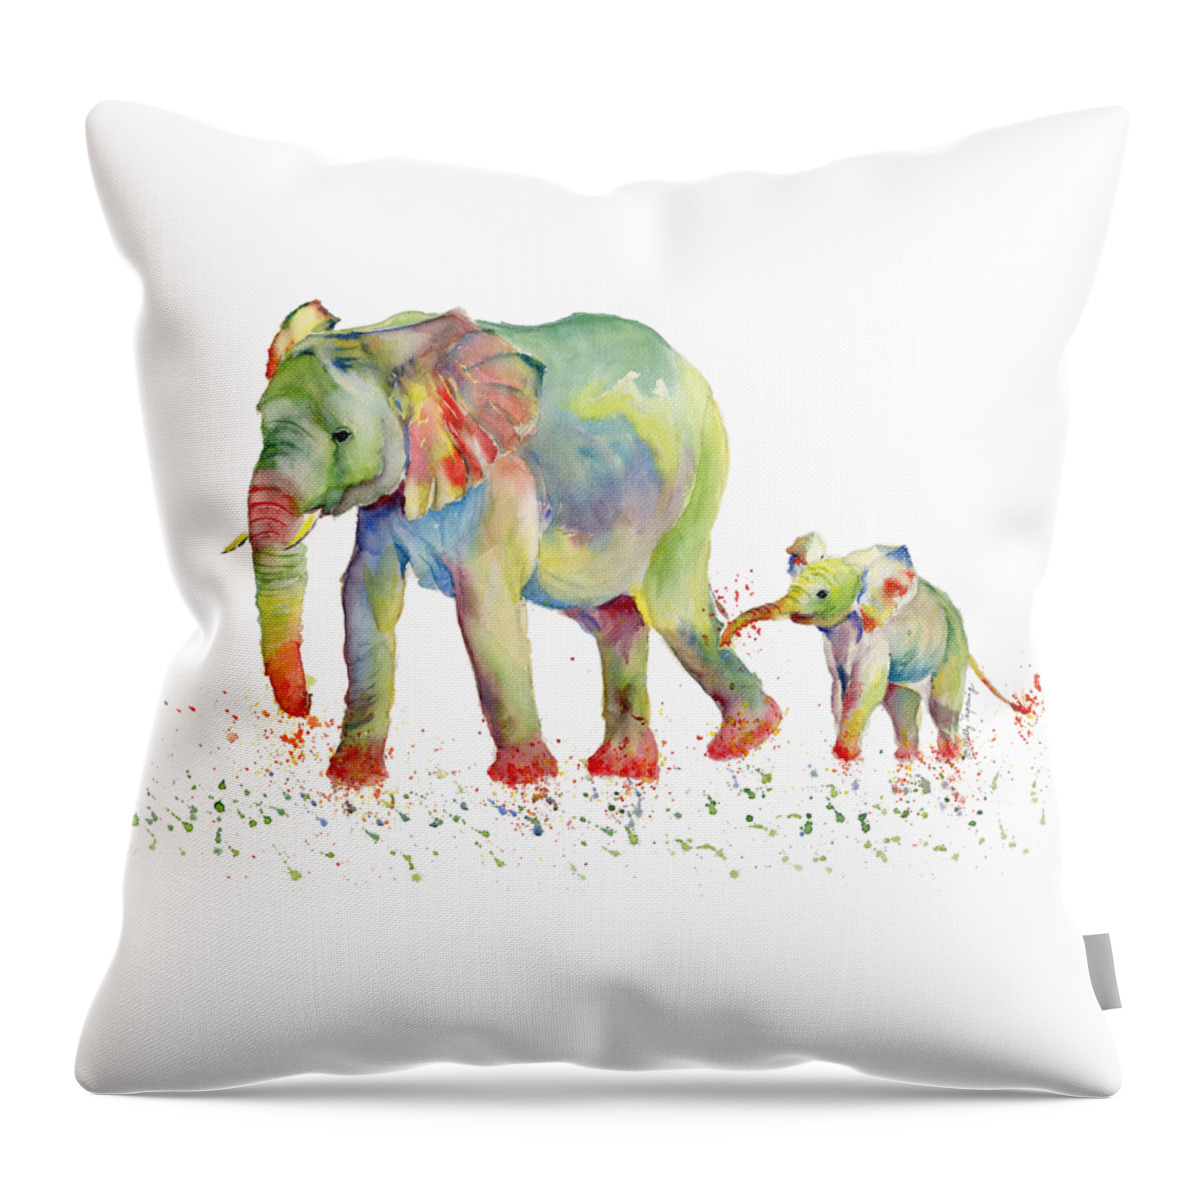 Elephant Throw Pillow featuring the painting Elephant Family Watercolor by Melly Terpening